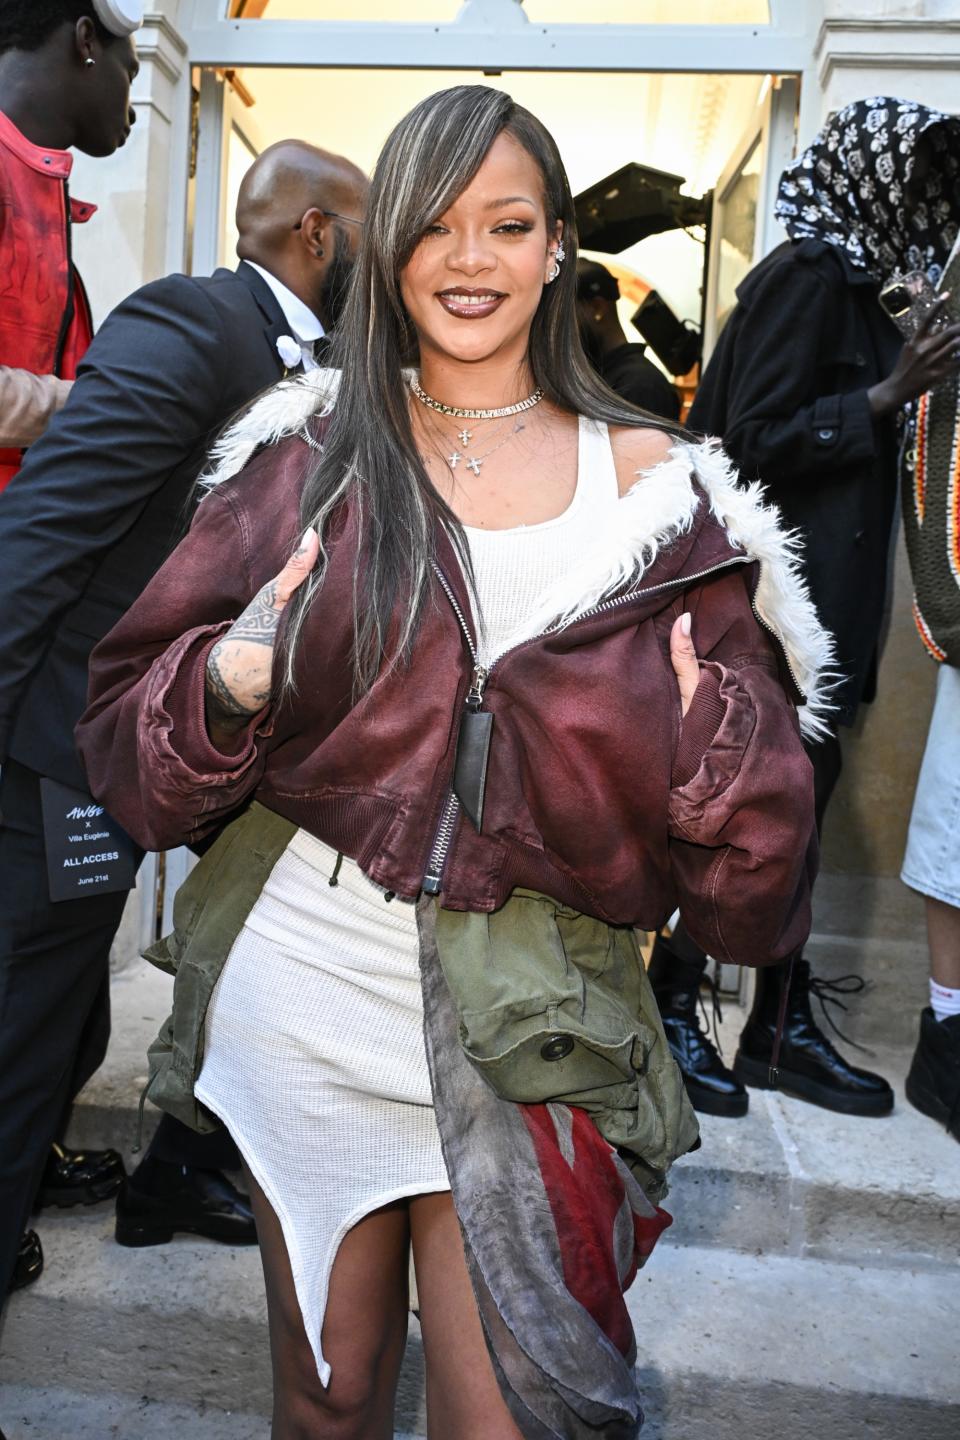 PARIS, FRANCE - JUNE 21: (EDITORIAL USE ONLY - For Non-Editorial use please seek approval from Fashion House) Rihanna attends the A$AP Rocky X American Sabotage by AWGE Menswear Spring/Summer 2025 show as part of Paris Fashion Week on June 21, 2024 in Paris, France. (Photo by Stephane Cardinale - Corbis/Corbis via Getty Images)